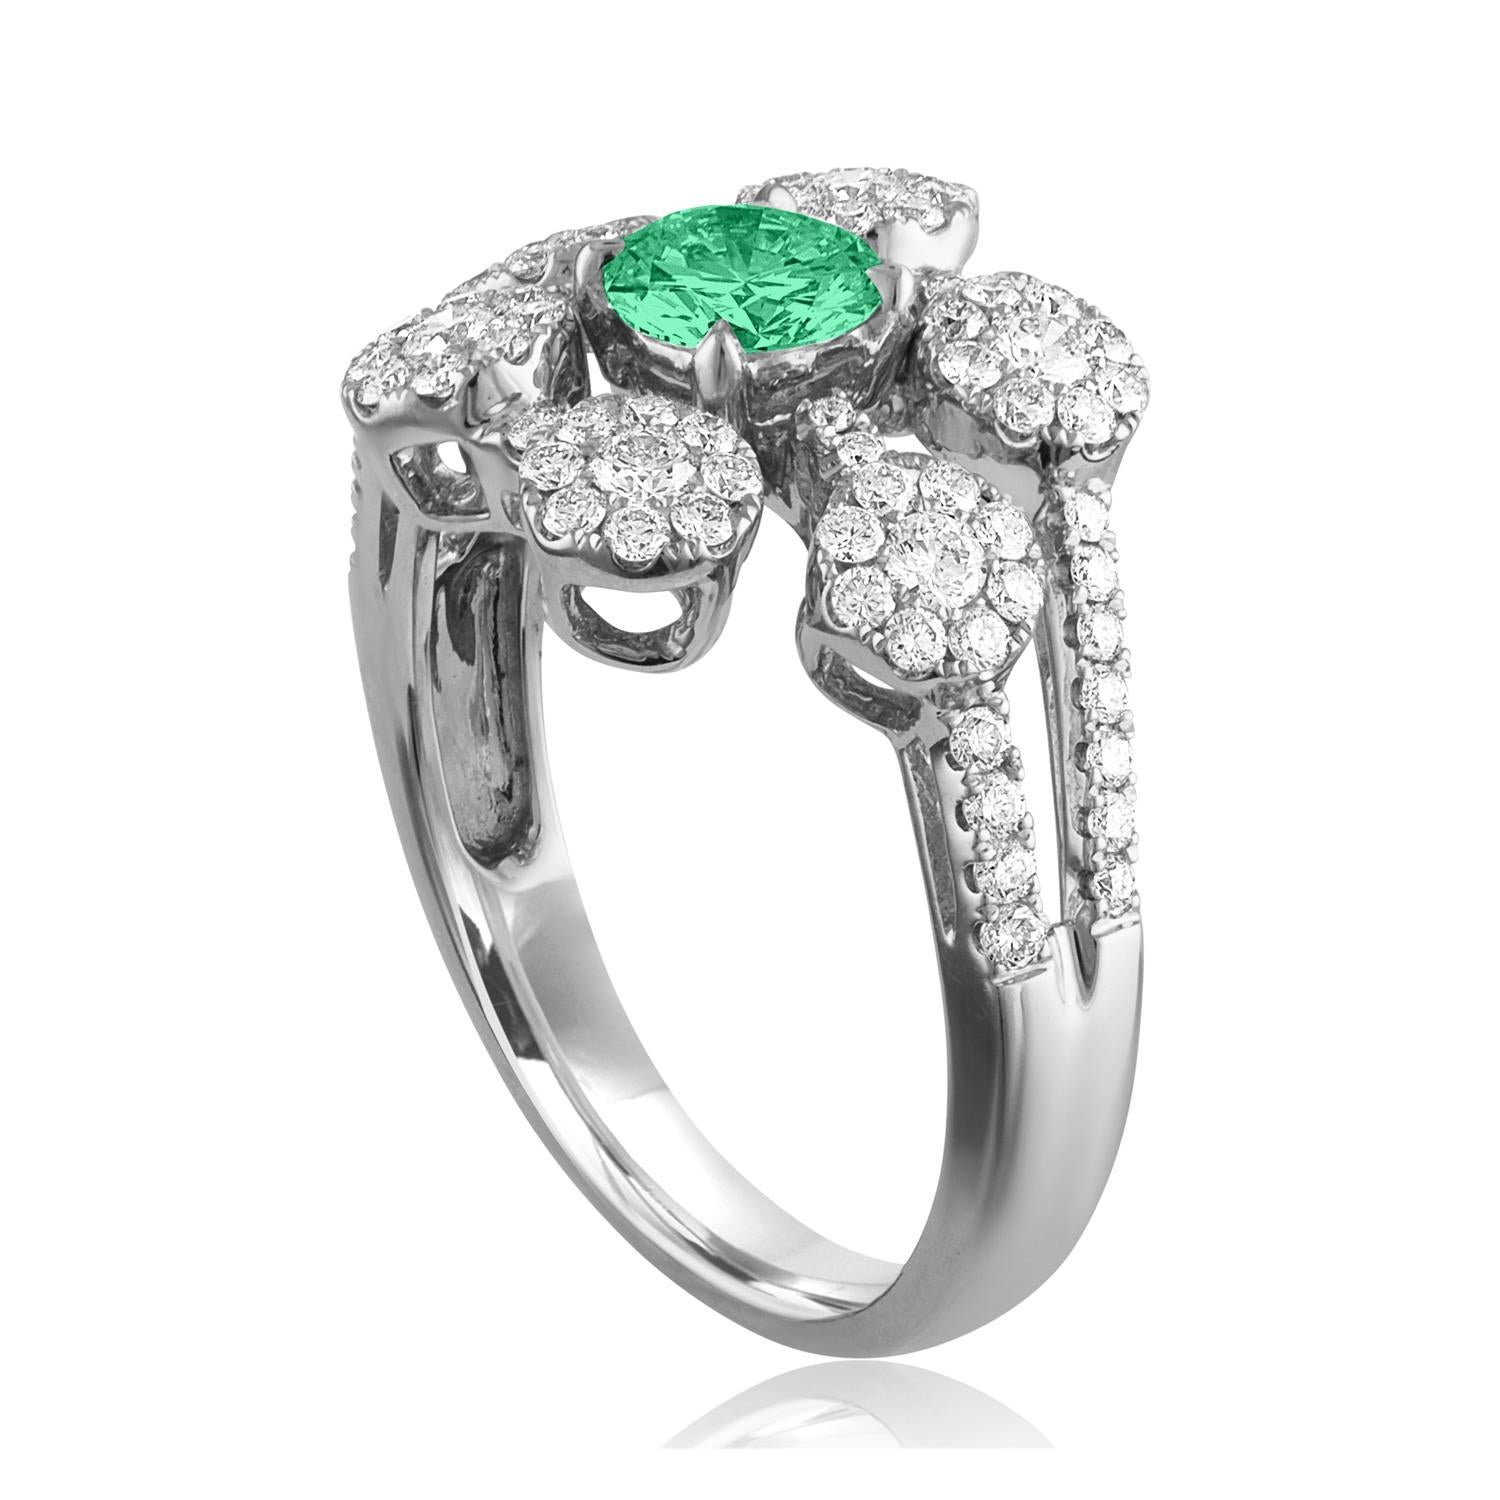 Beautiful Diamond & Emerald Flower Ring
The ring is 18K White Gold.
There are 0.73 Carats in Diamonds F/G VS/SI
The Center is Round 0.40 Carat Emerald.
The Emerald is AGL certified.
The ring is a size 6.50, sizable.
The ring weighs 5.2 grams.